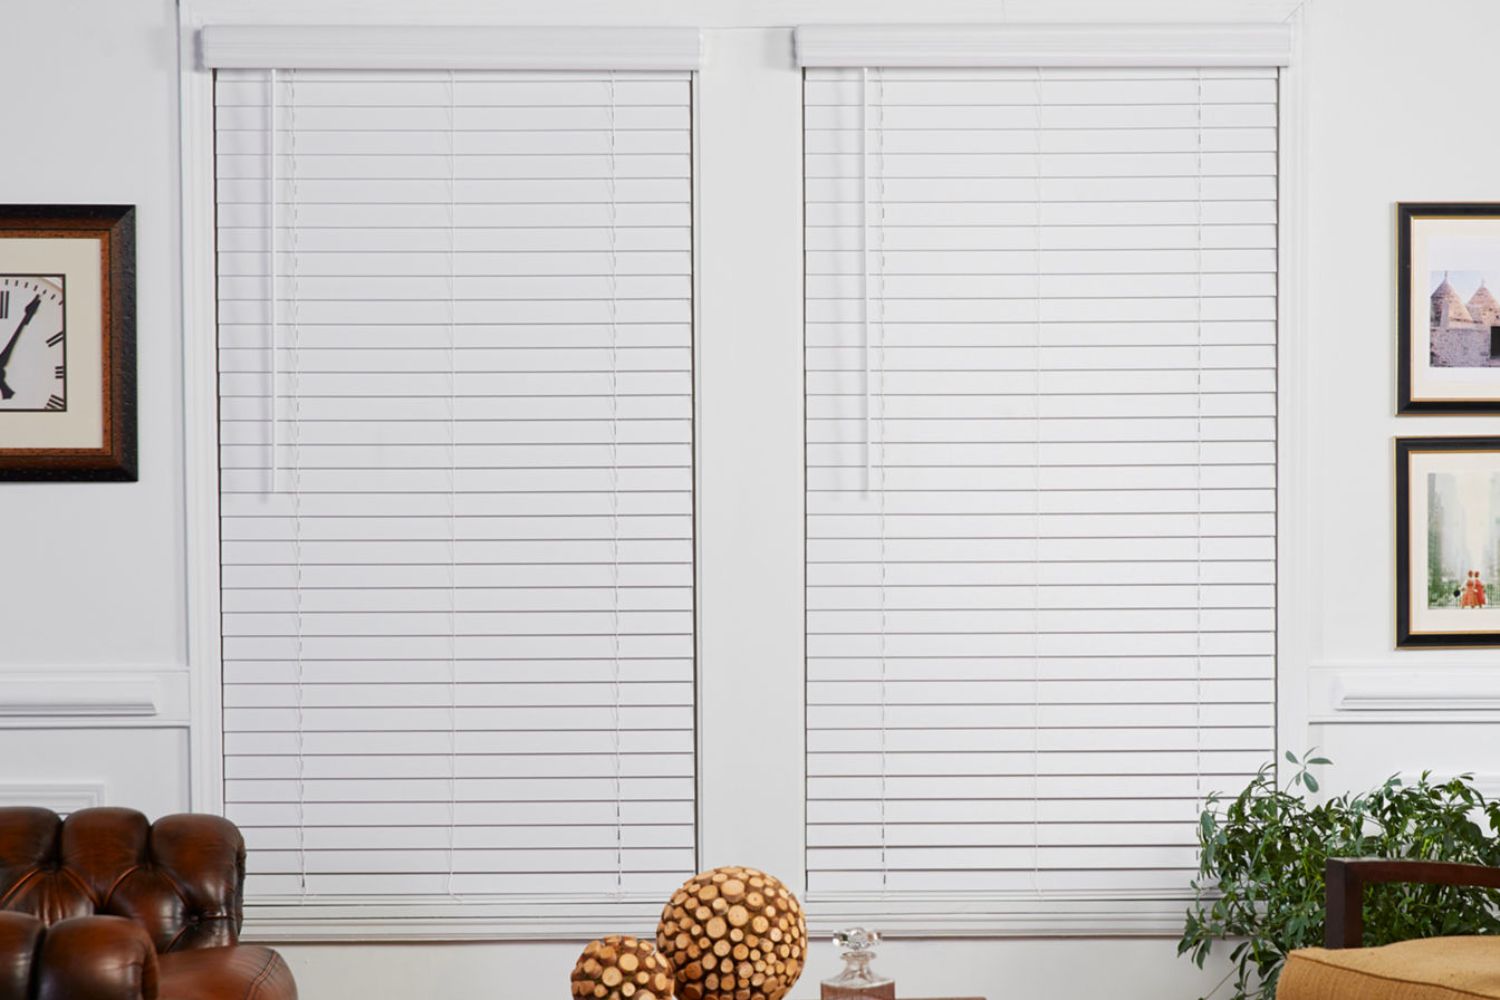 The Best Places to Buy Blinds Online Option: JCPenney